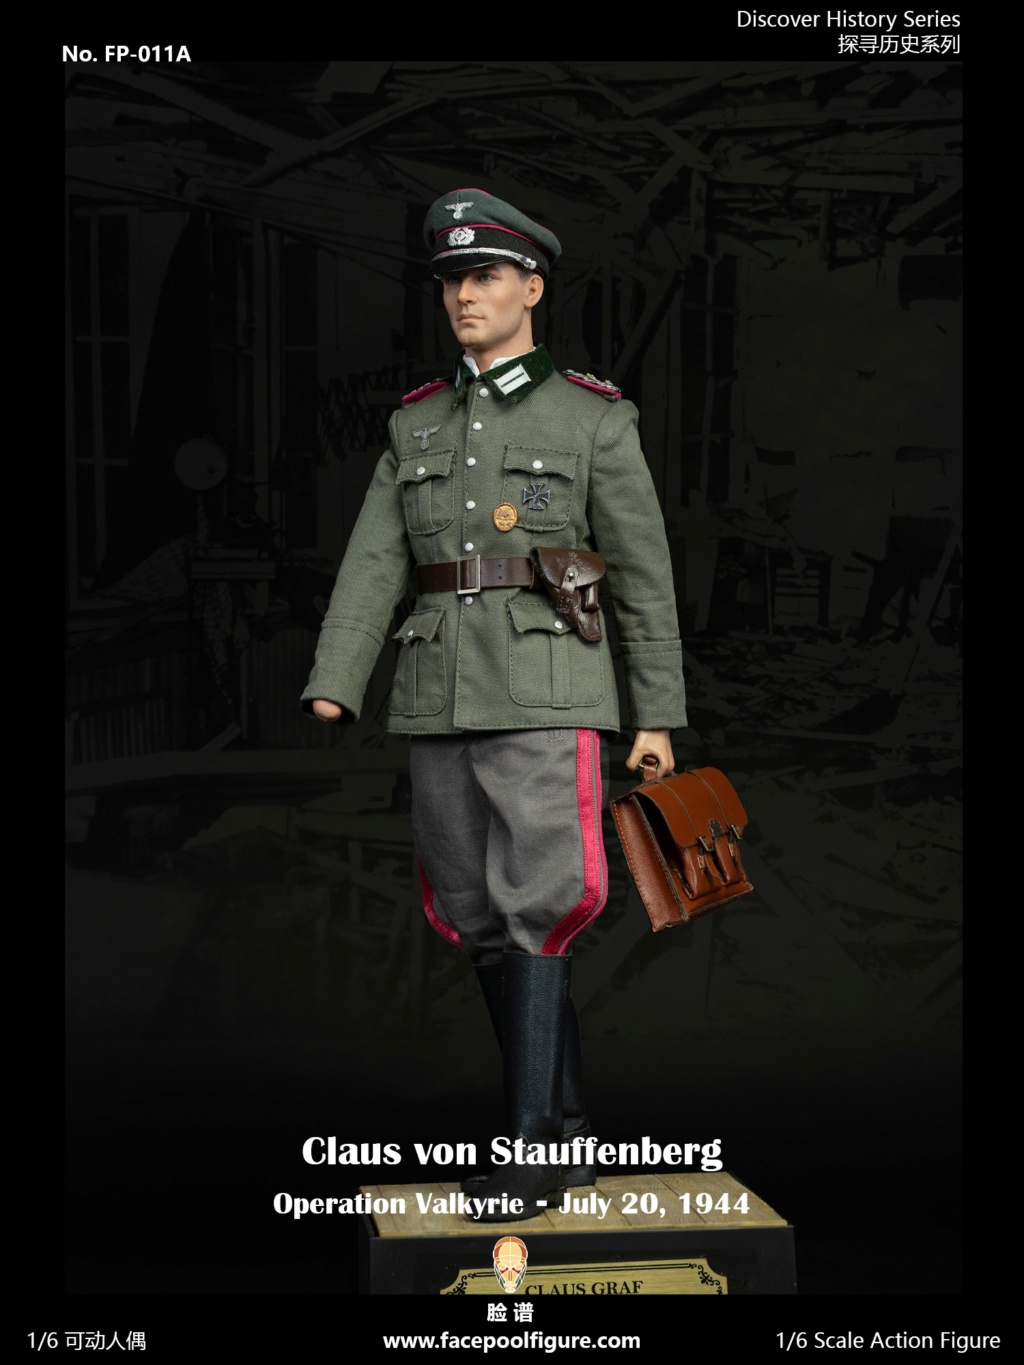 OperationValkyrie - NEW PRODUCT: Facepool: 1/6 Exploring history series: Operation Valkyrie (accessories correction) 06465910